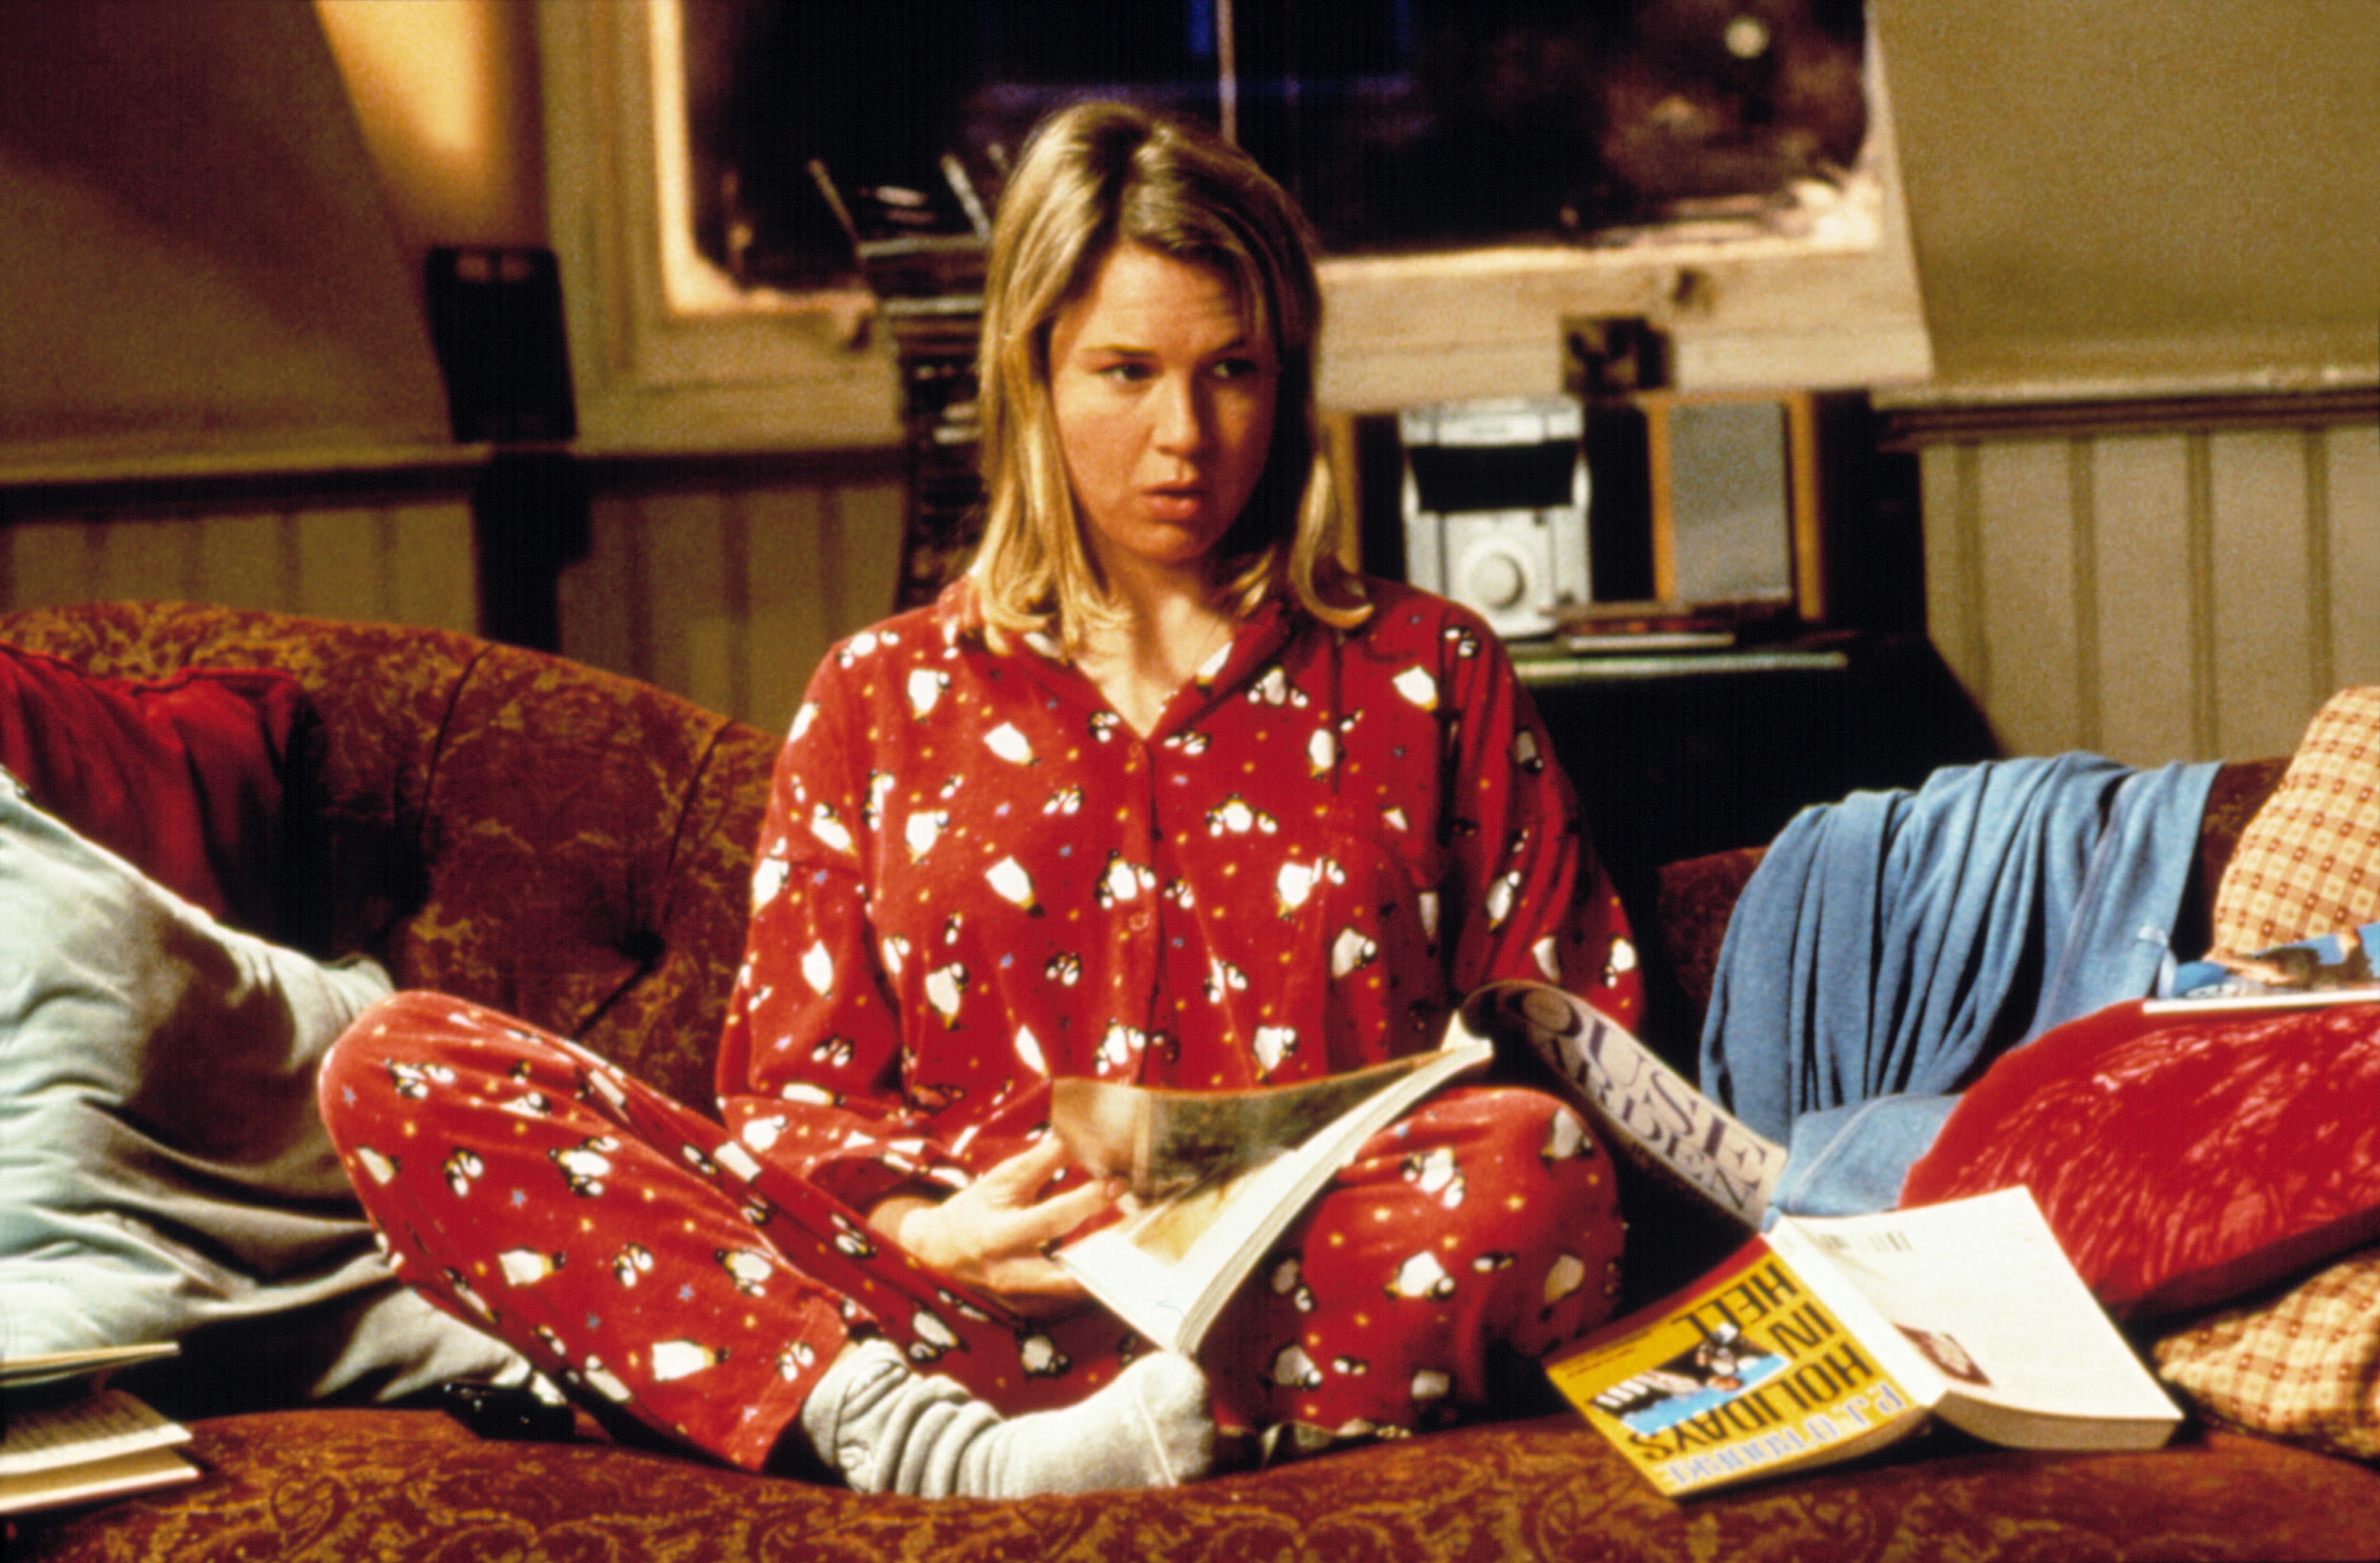 Still from Bridget Jones&#x27;s Diary: Renee Zellweger sits on a couch in pyjamas and socks reading a magazine